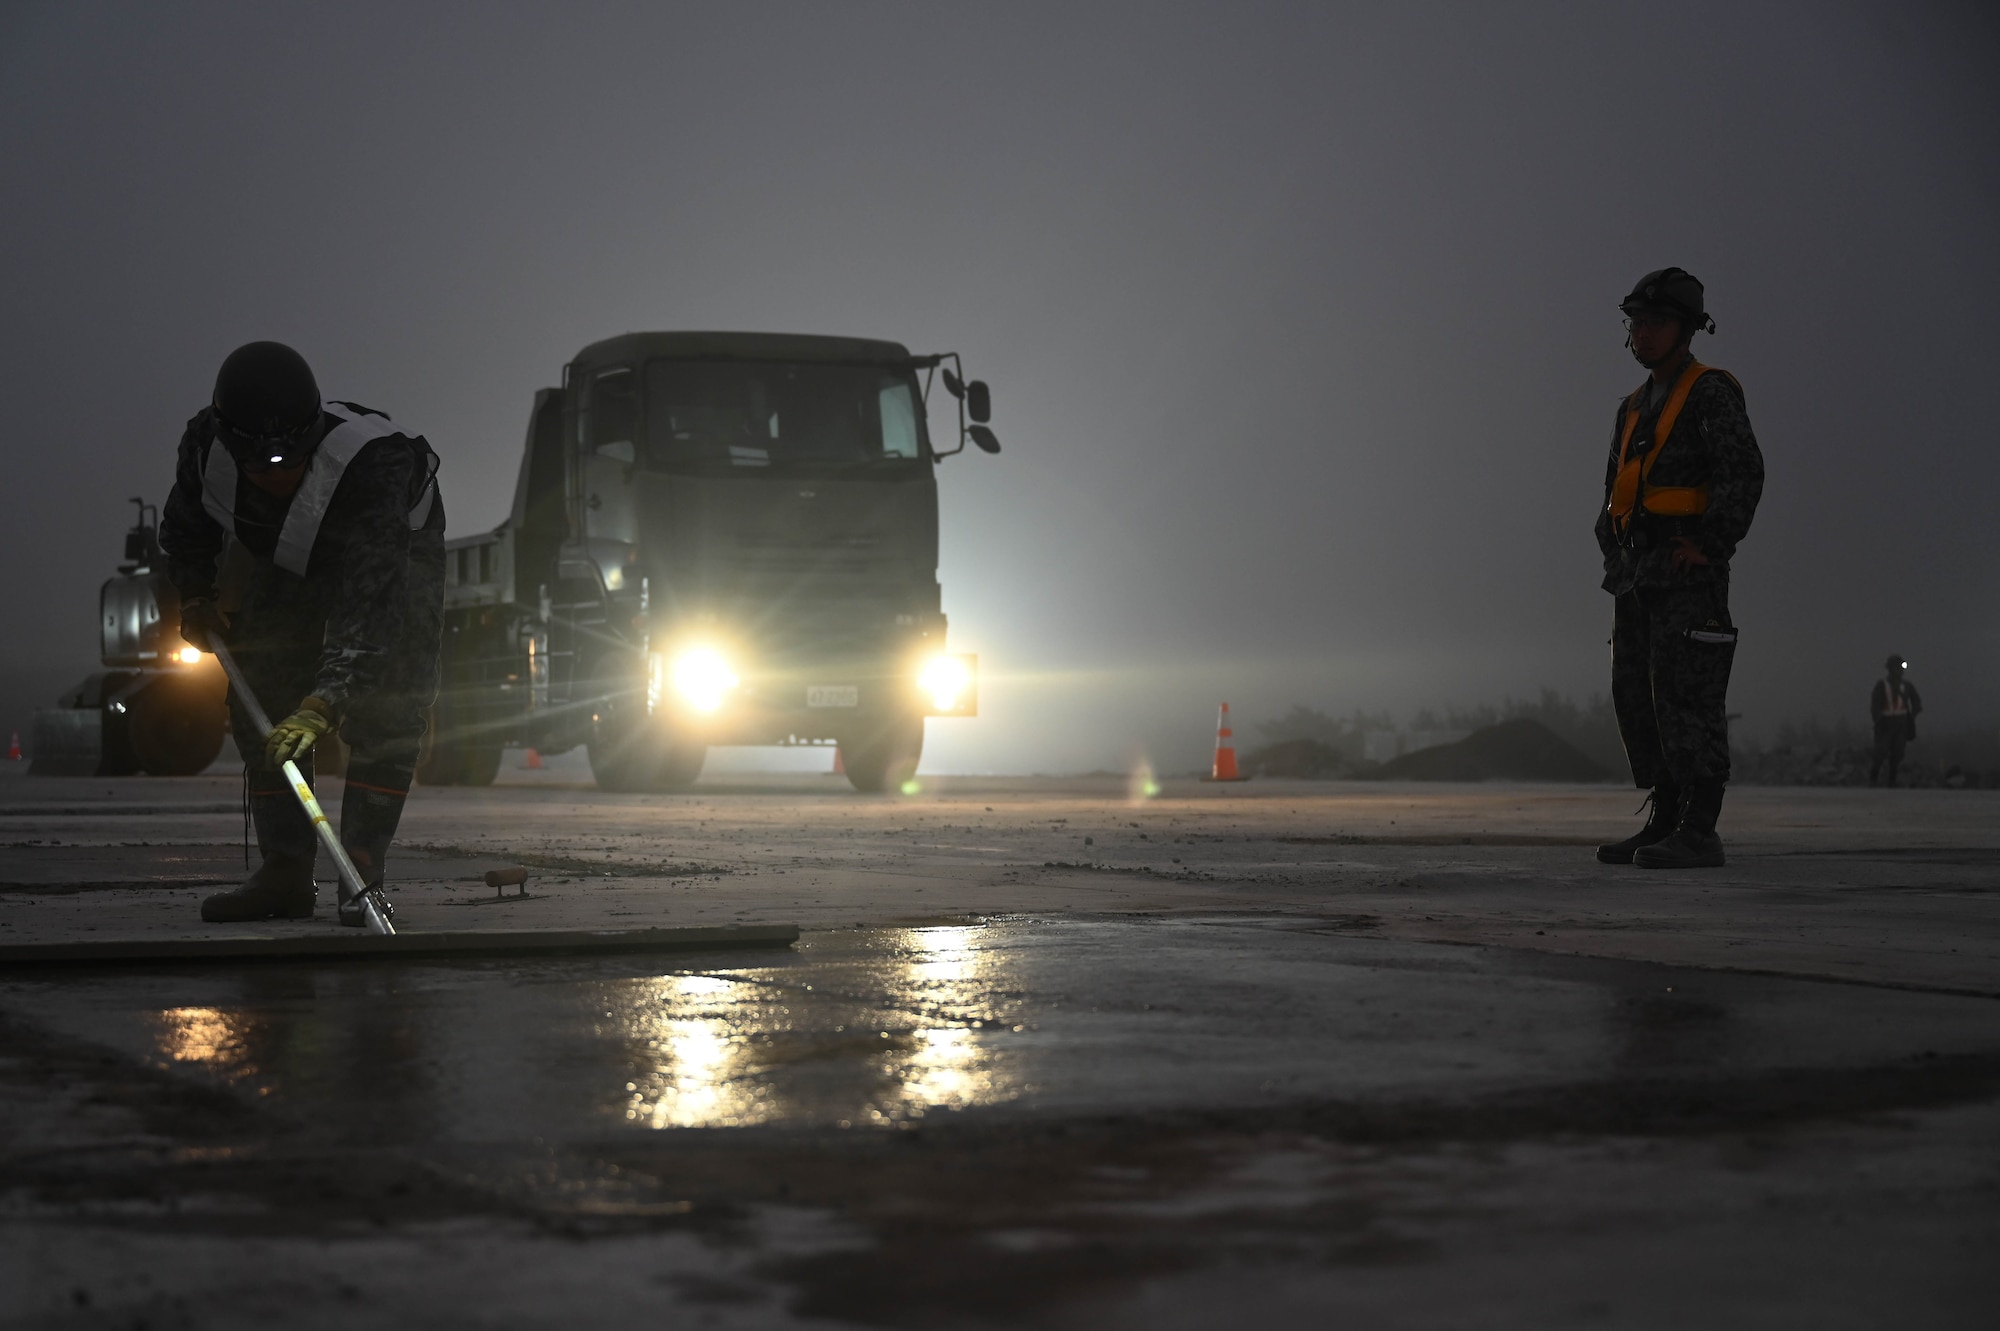 A Japan Air Self-Defense Force Airman smooths out wet concrete at night.